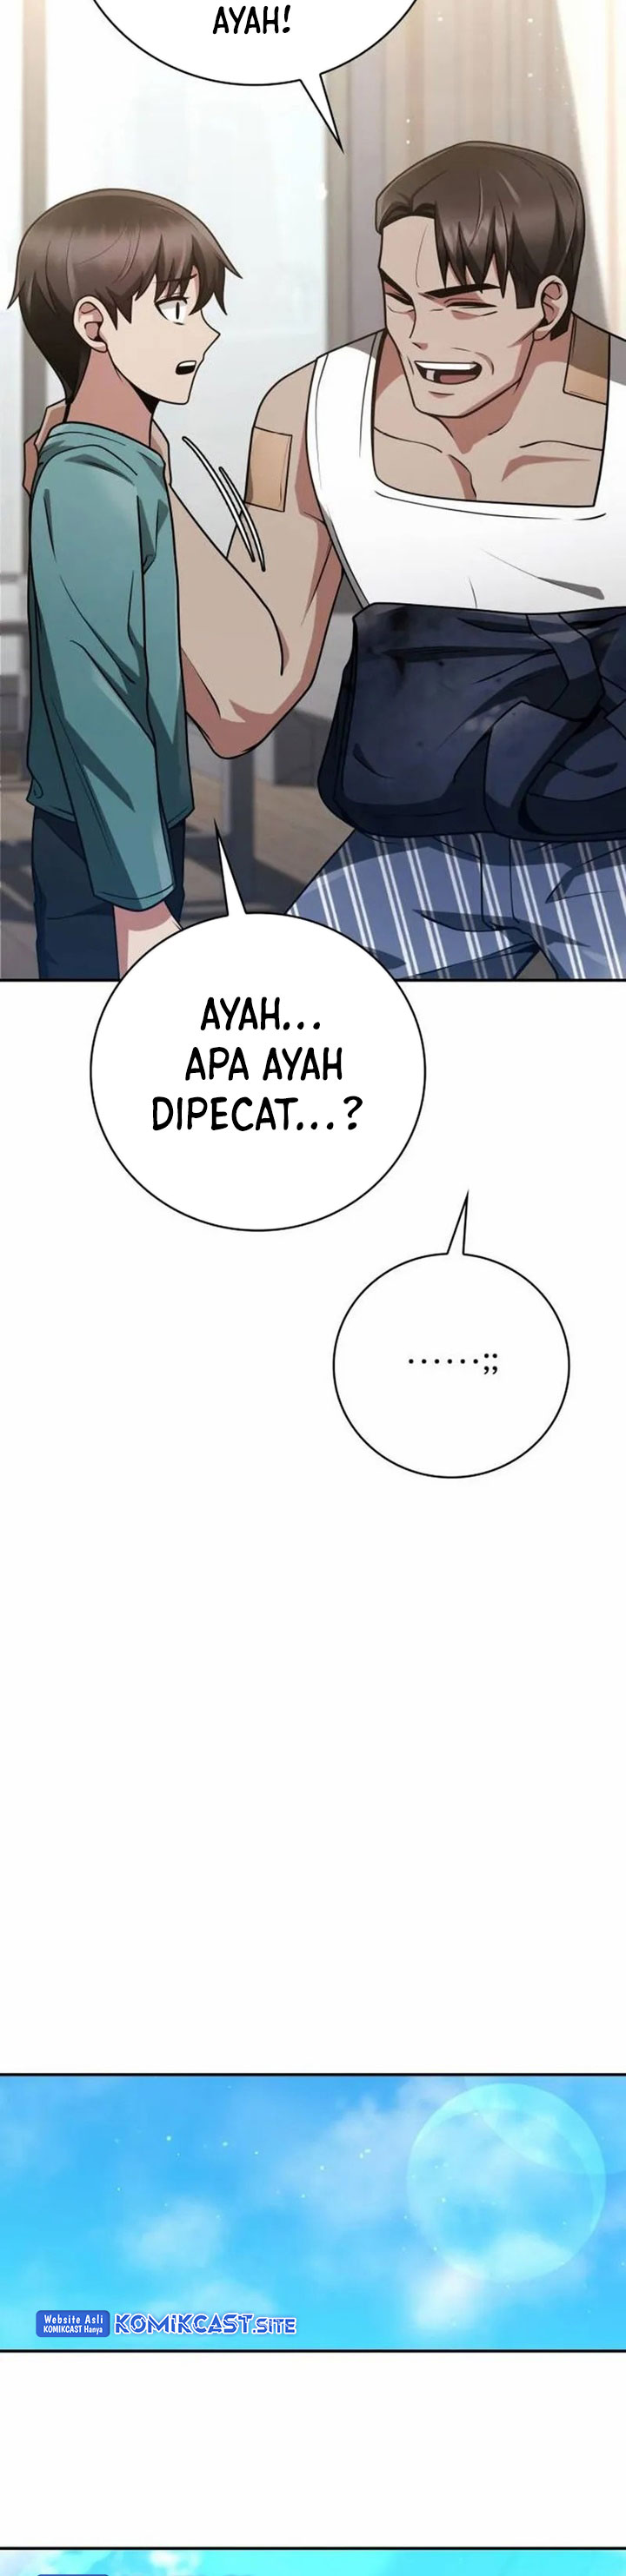 Dilarang COPAS - situs resmi www.mangacanblog.com - Komik clever cleaning life of the returned genius hunter 032 - chapter 32 33 Indonesia clever cleaning life of the returned genius hunter 032 - chapter 32 Terbaru 59|Baca Manga Komik Indonesia|Mangacan